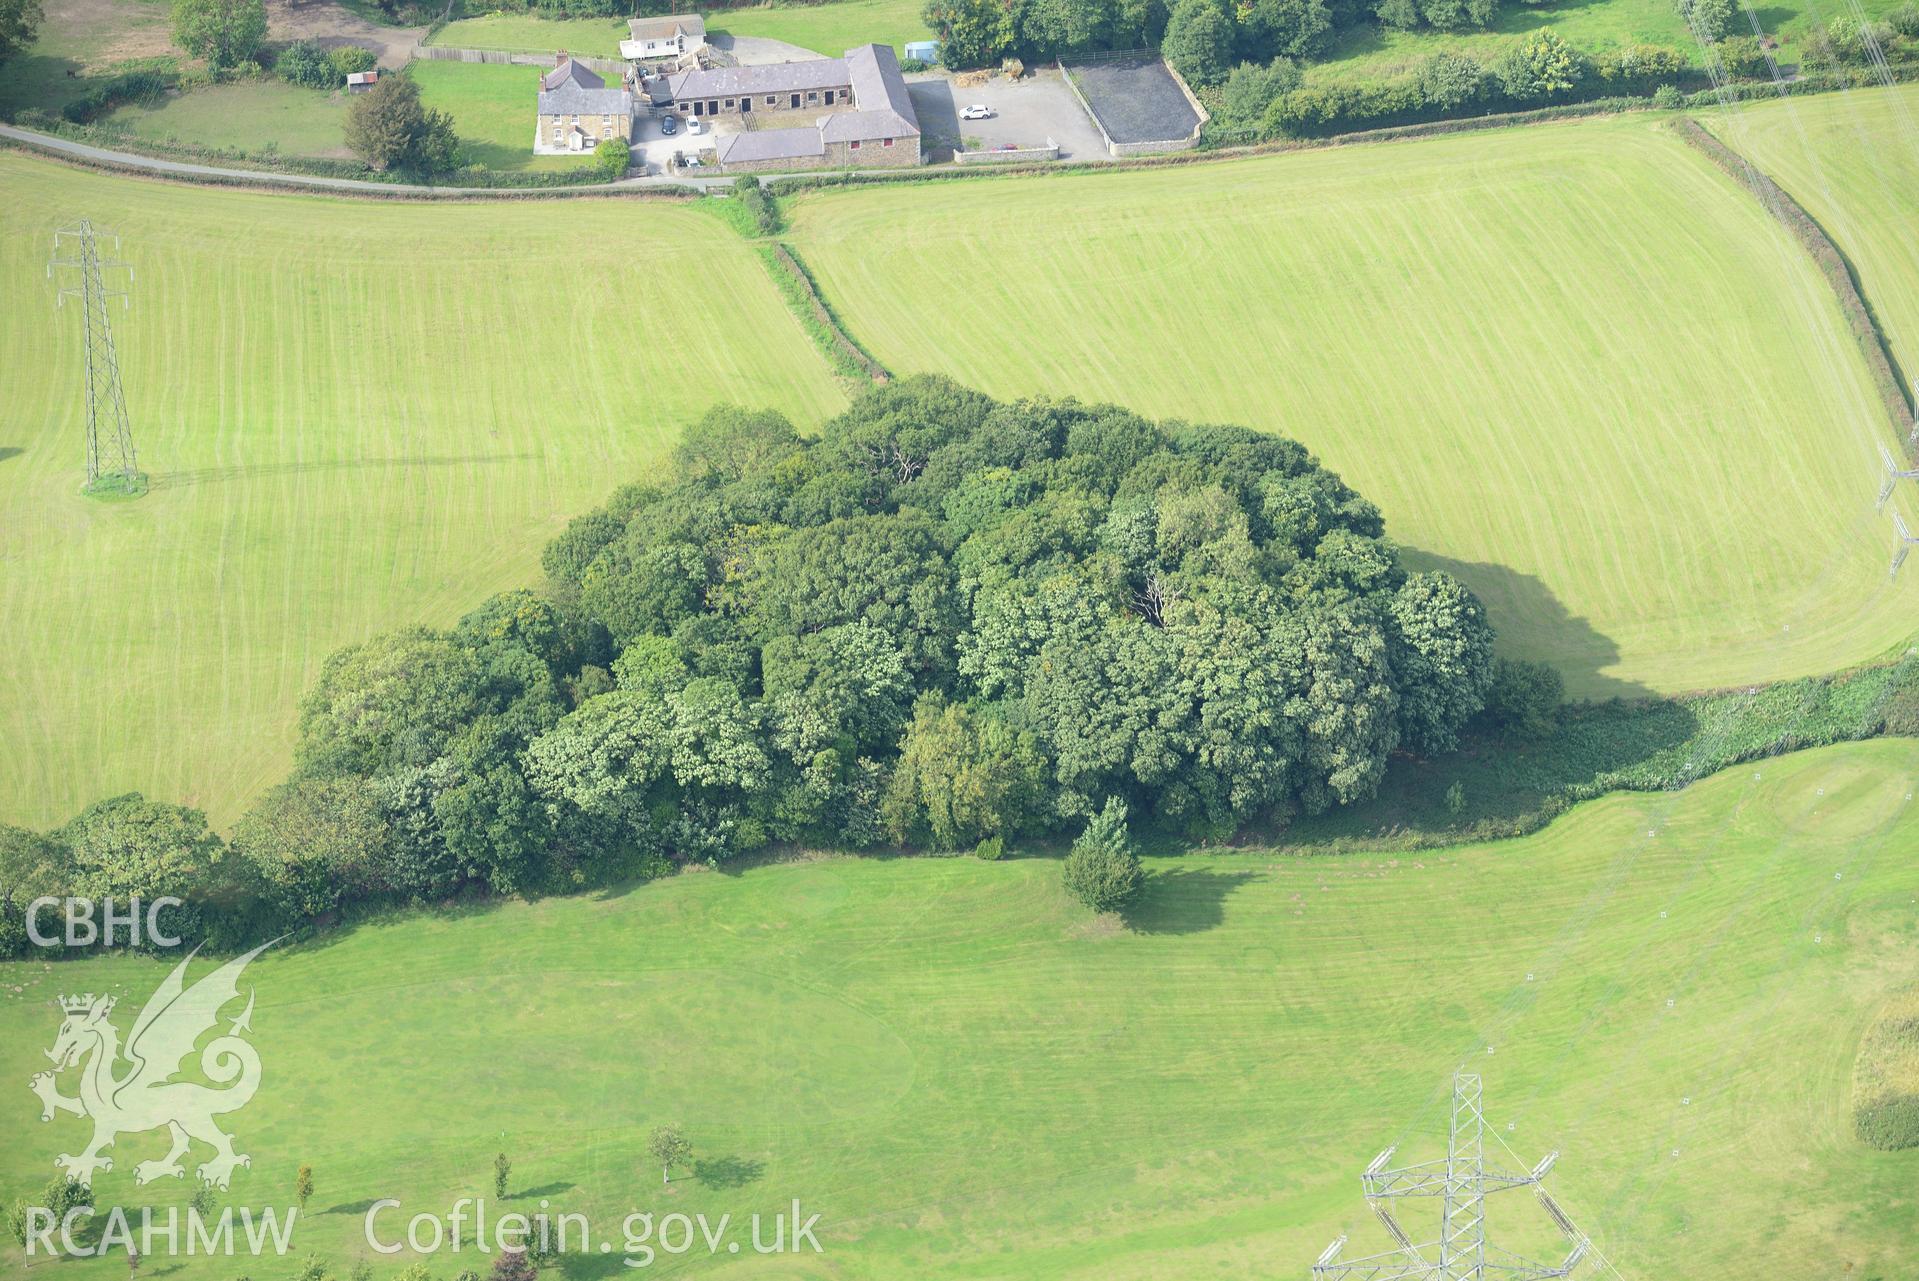 Bryn-y-Cwm motte, near Flint. Oblique aerial photograph taken during the Royal Commission's programme of archaeological aerial reconnaissance by Toby Driver on 11th September 2015.